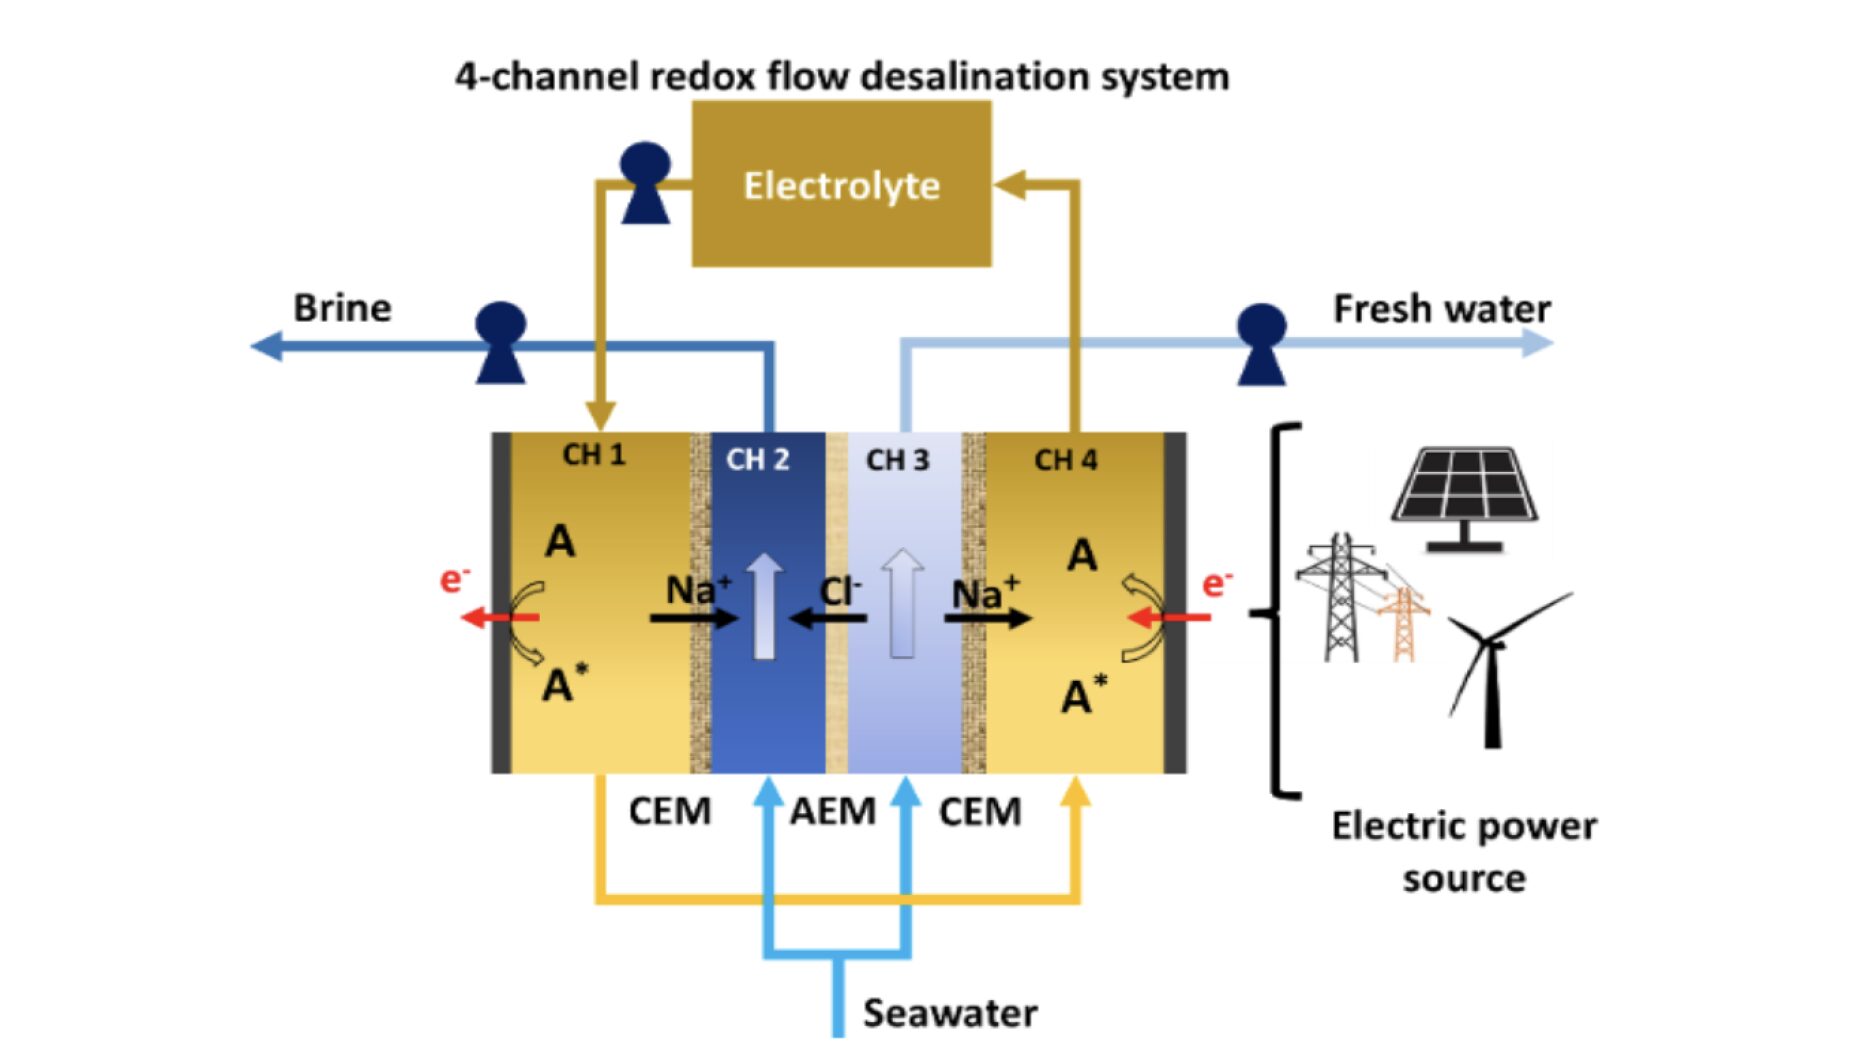 Schematic for a four-channel RFD in single-pass mode with an A/A*, representing electrochemical reactions of redox species dissolved in conducting salts solutions, and channels separated by cation-exchange membrane (CEM) and anion-exchange membrane (AEM).